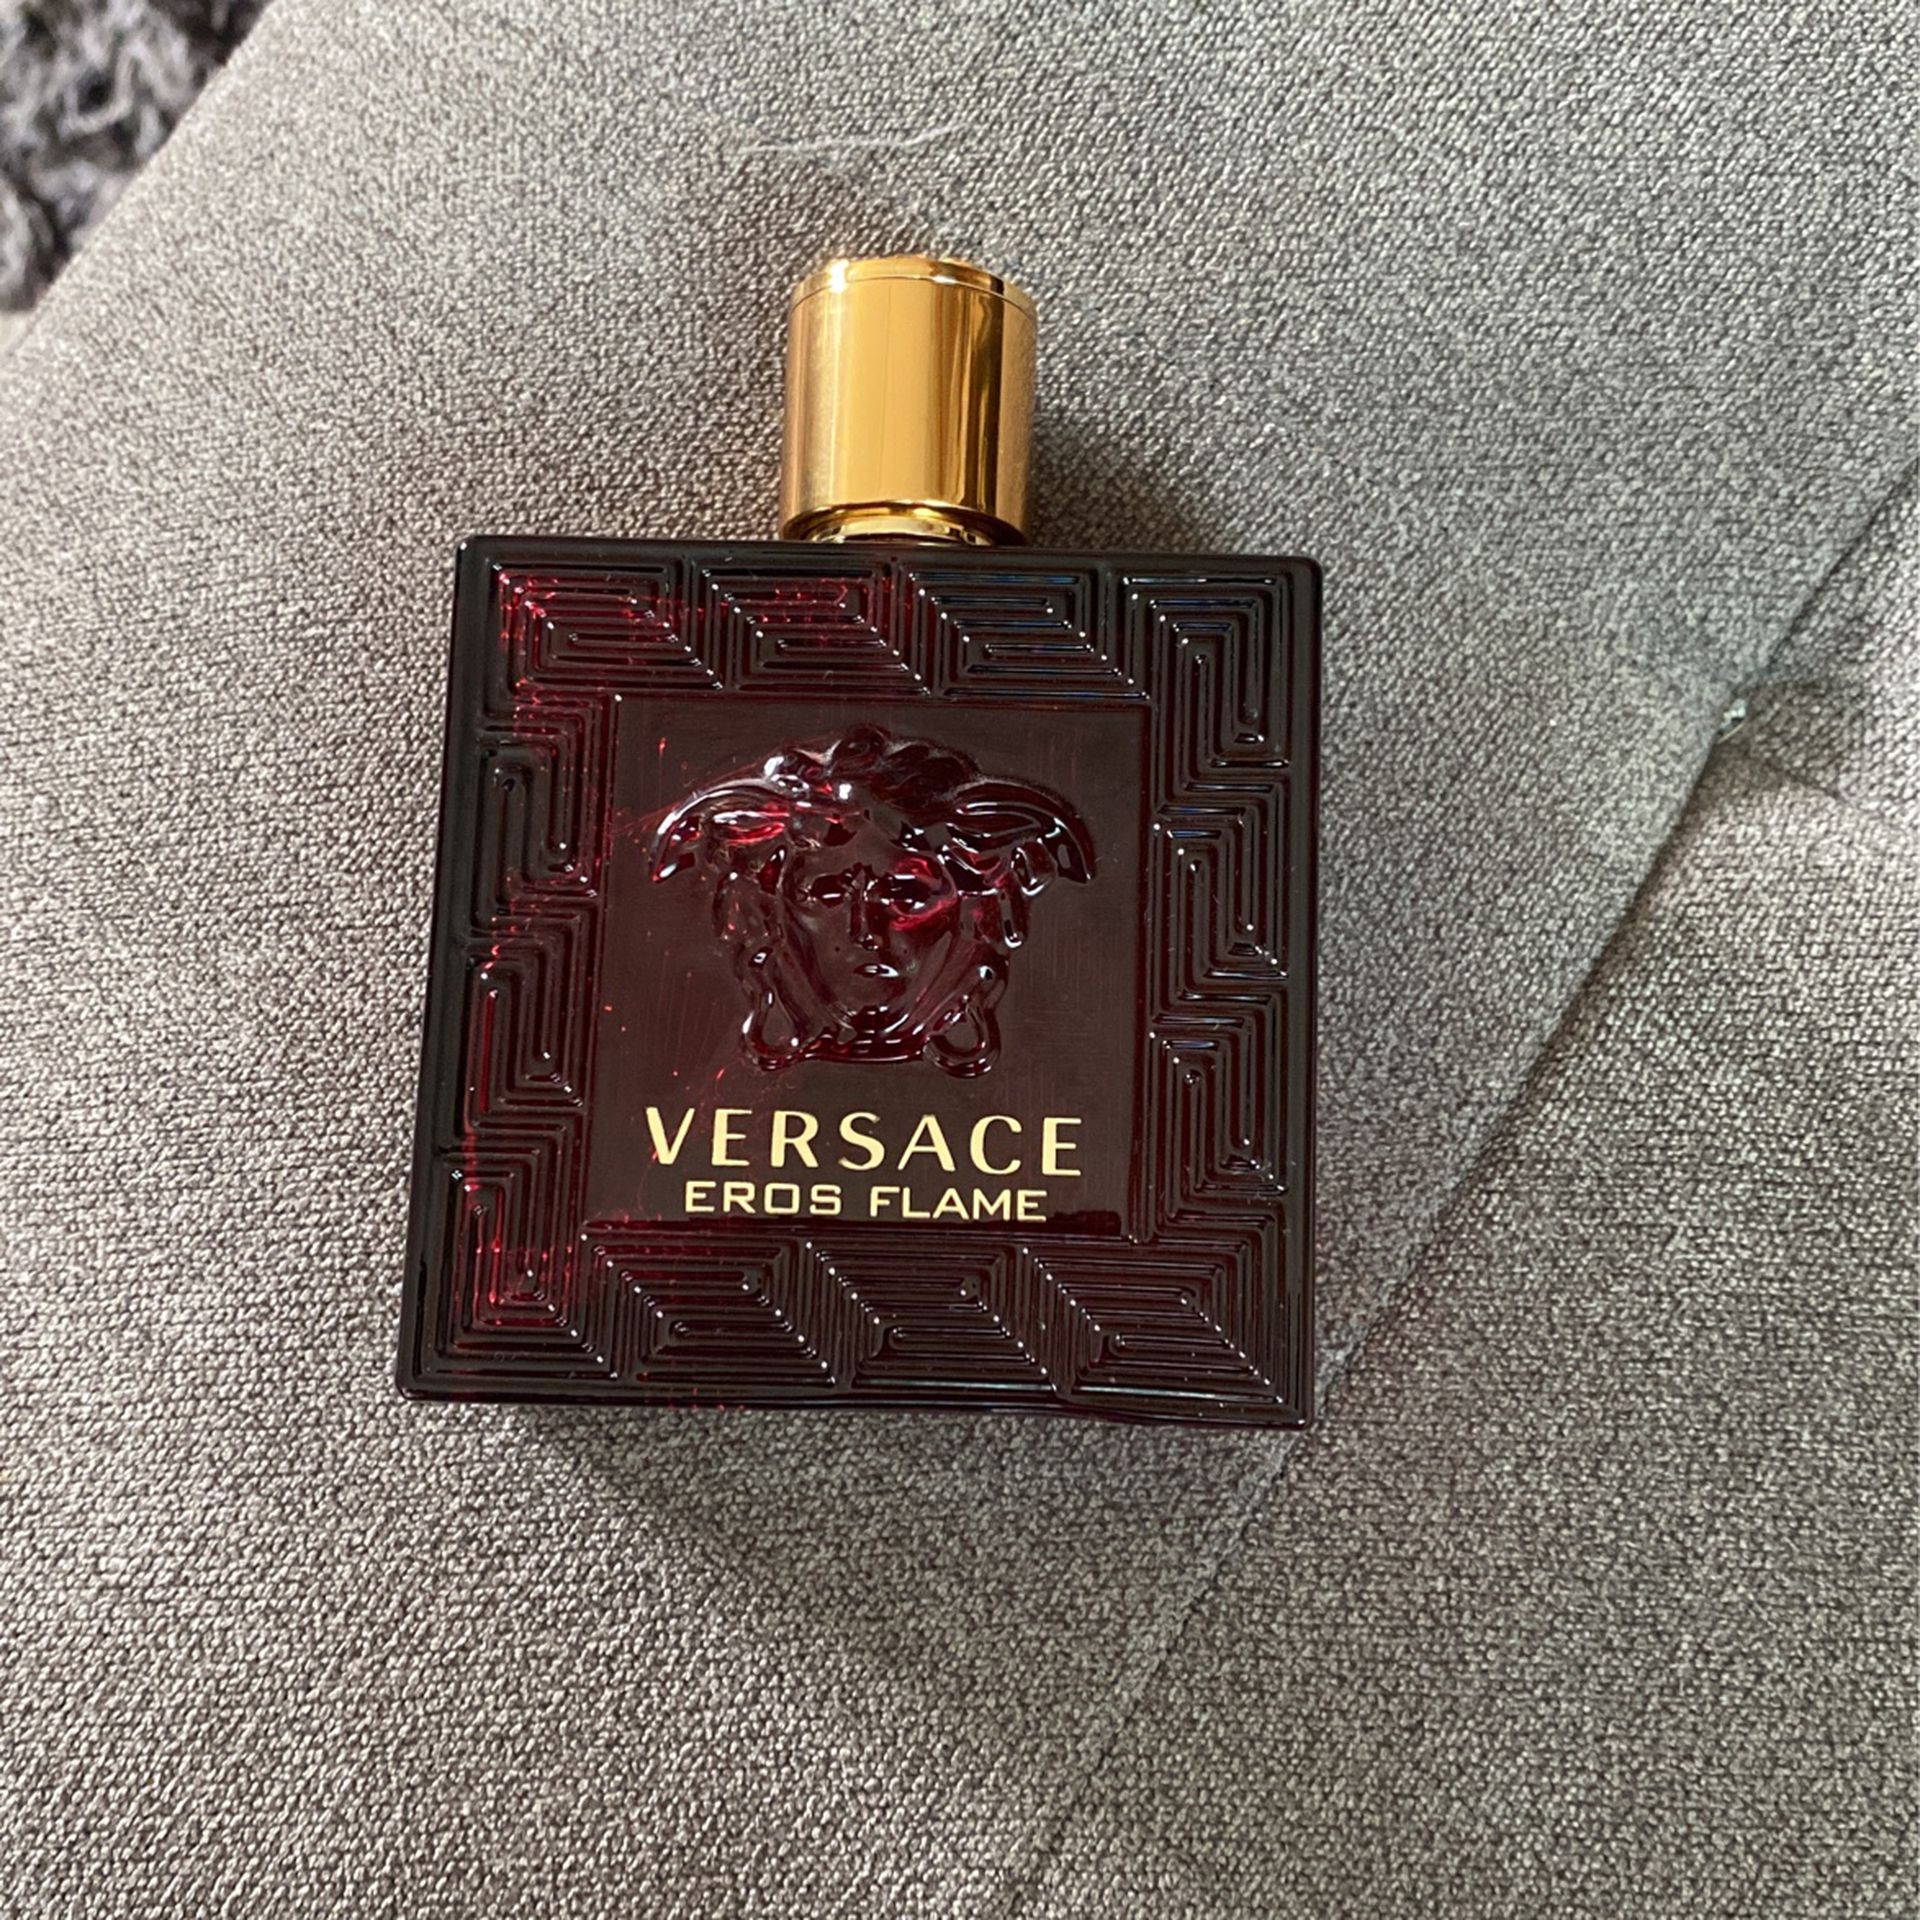 Versace cologne, new for Sale in Bend, OR - OfferUp